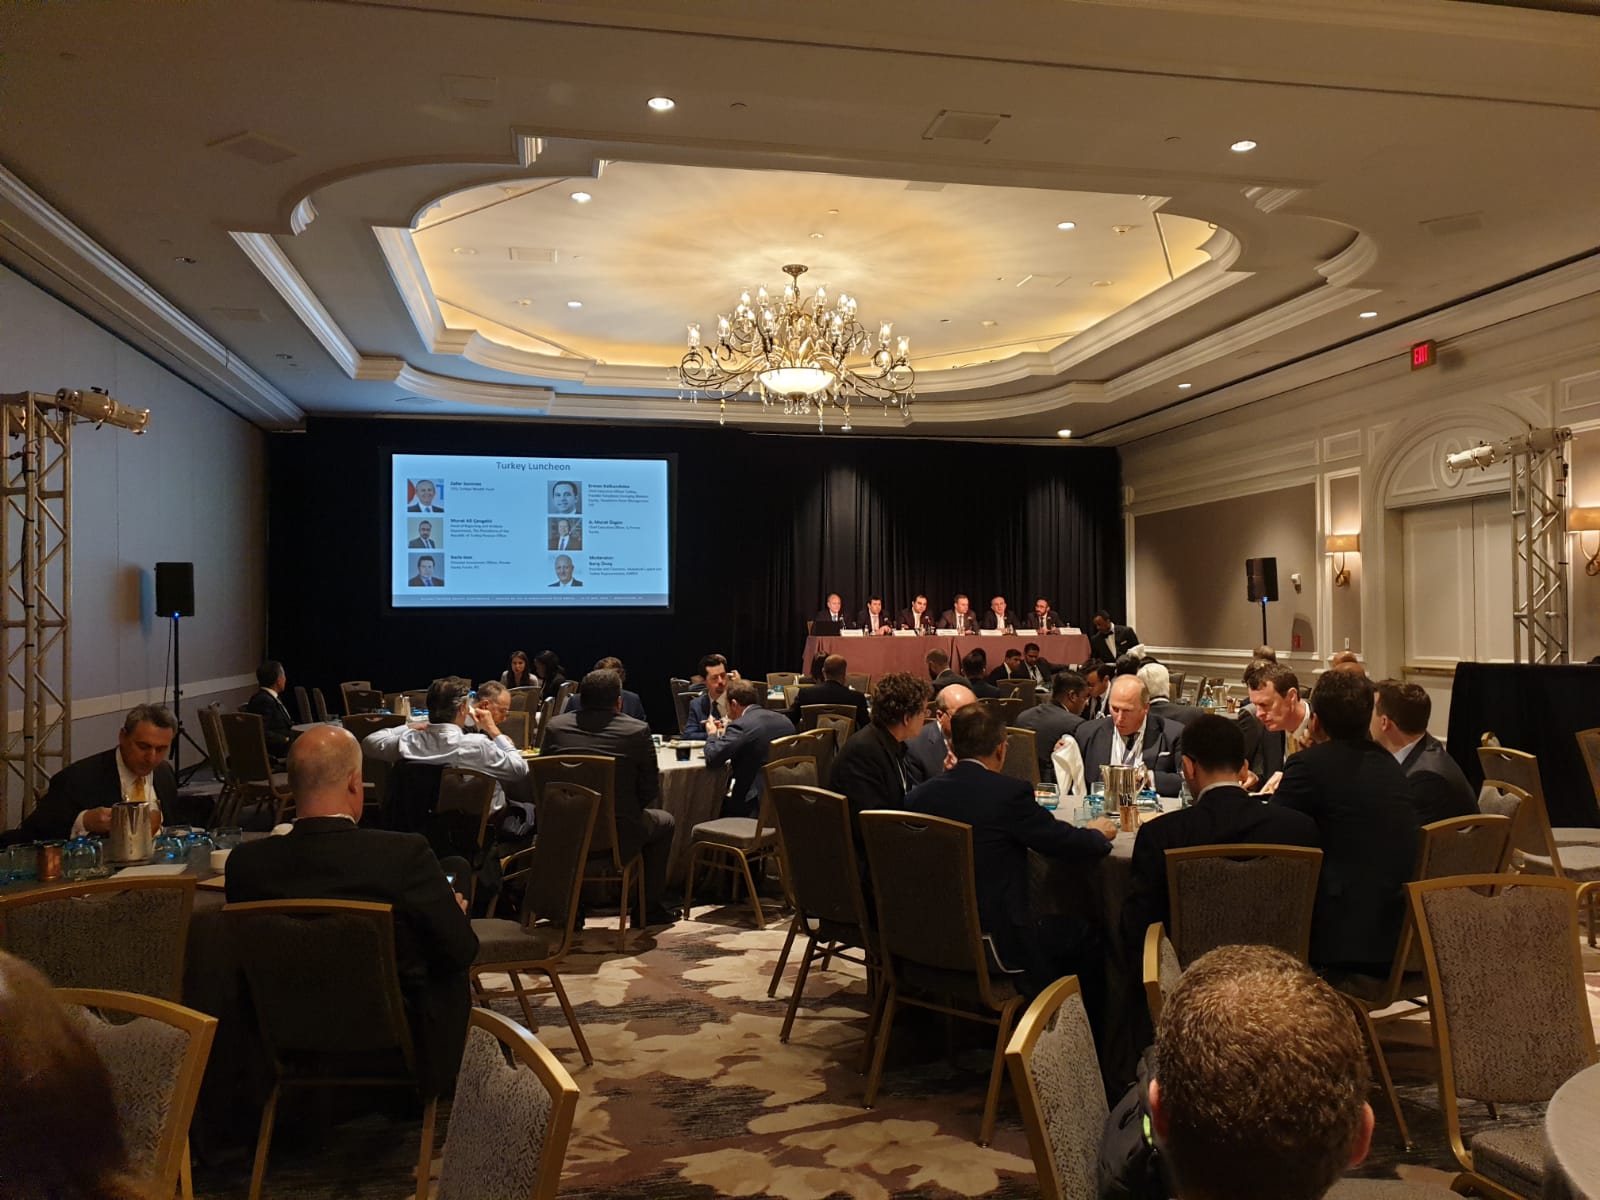 21st IFC-EMPEA Global Private Equity Conference in Washington DC, 13-15 May 2019